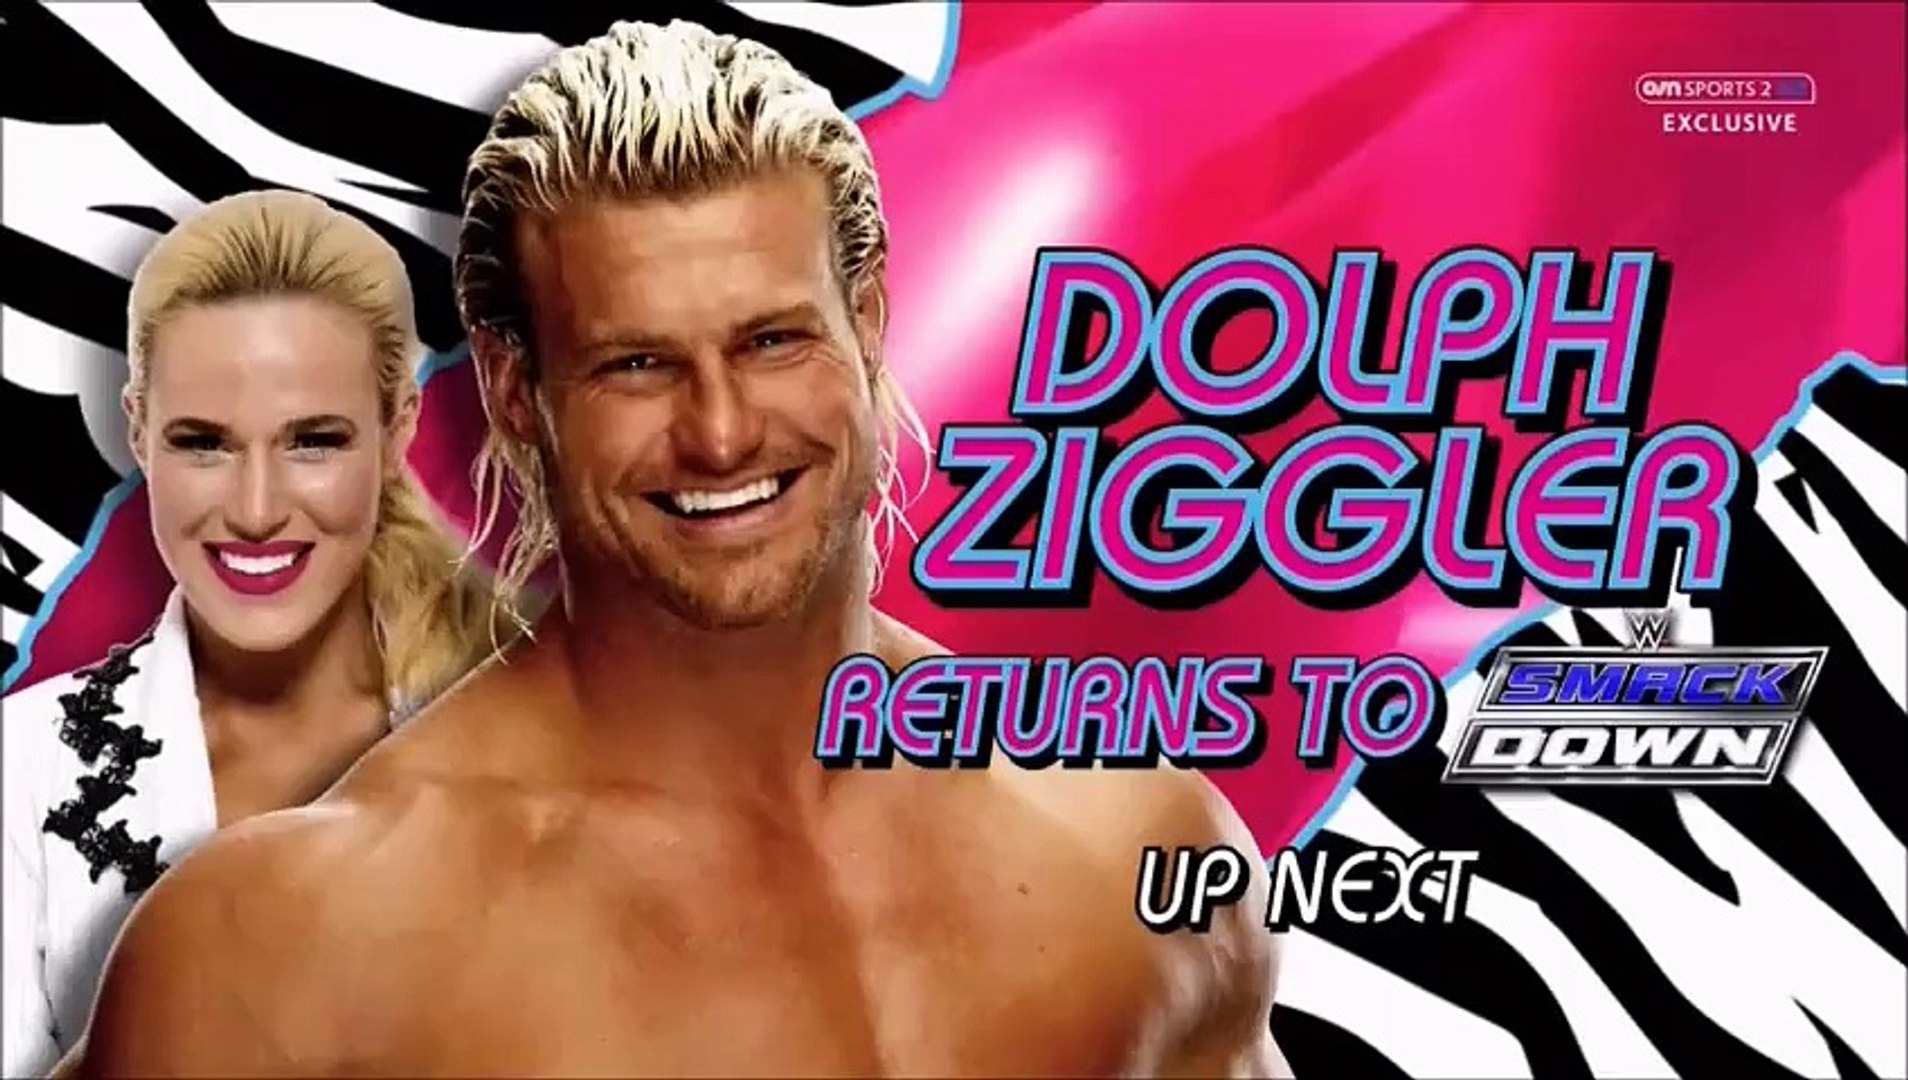 Dilph Ziggler return With Lana with greate kiss:) - video Dailymotion